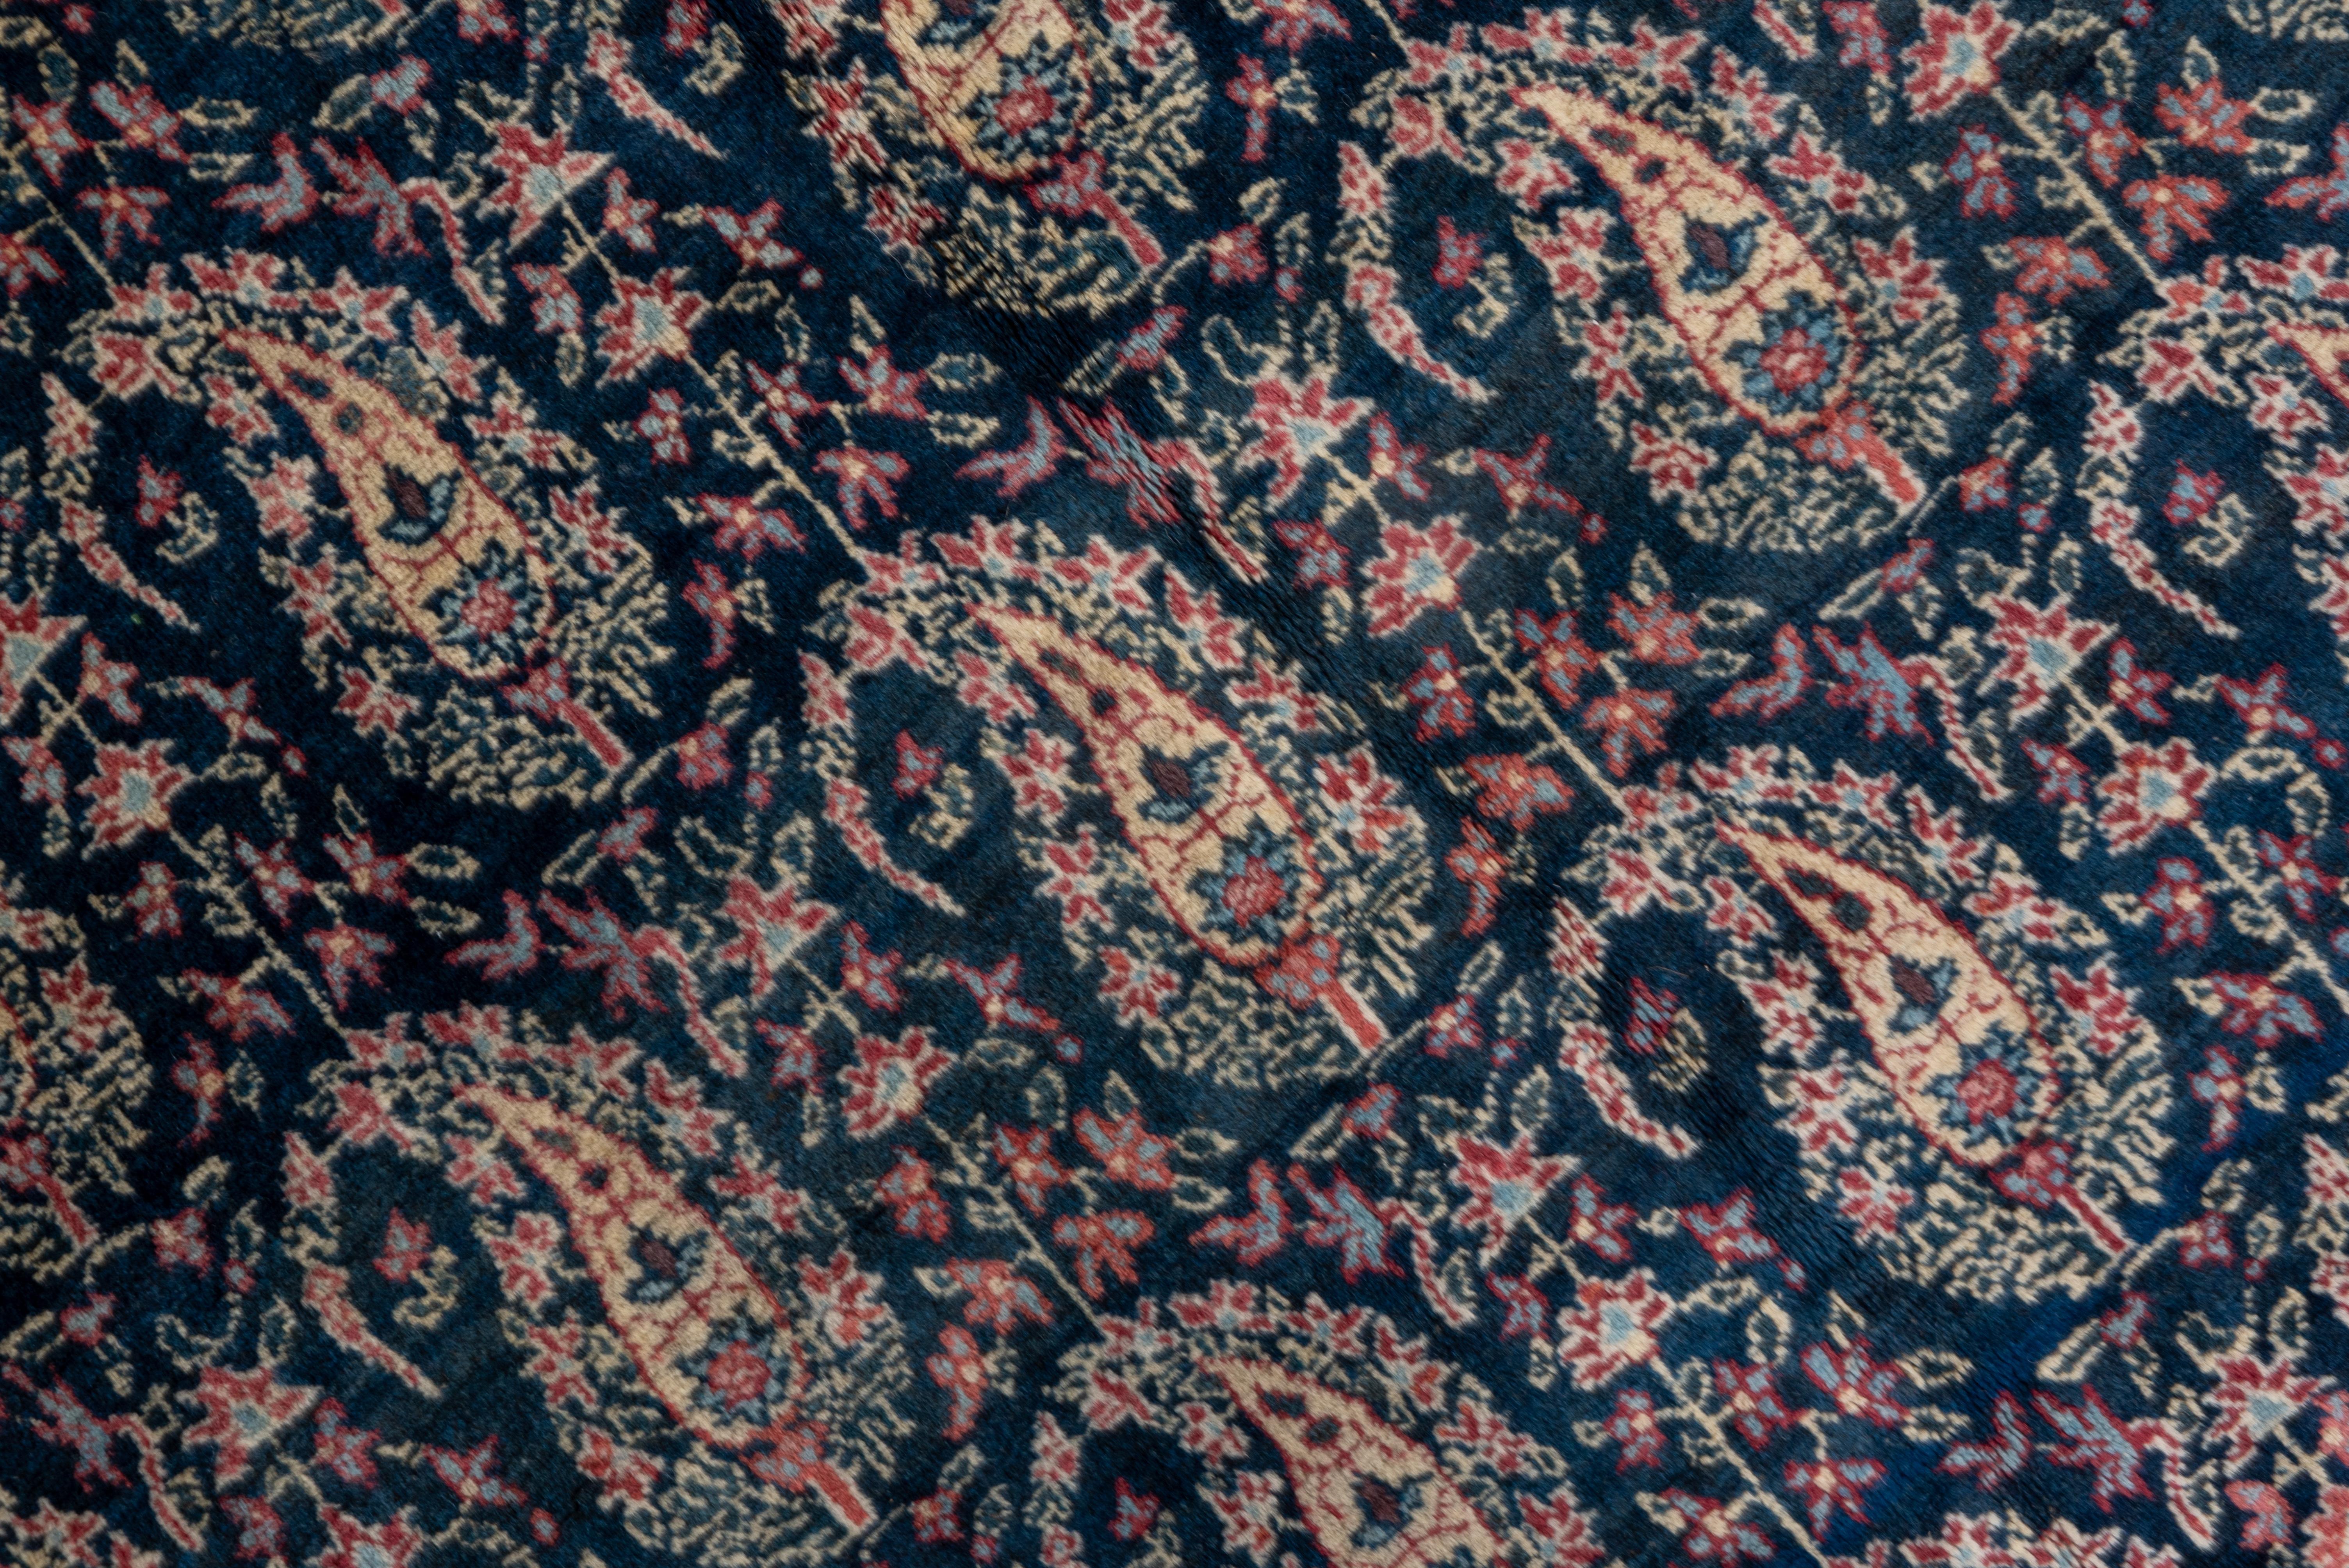 Antique Persian Tabriz Gallery Carpet, circa 1910s In Good Condition For Sale In New York, NY